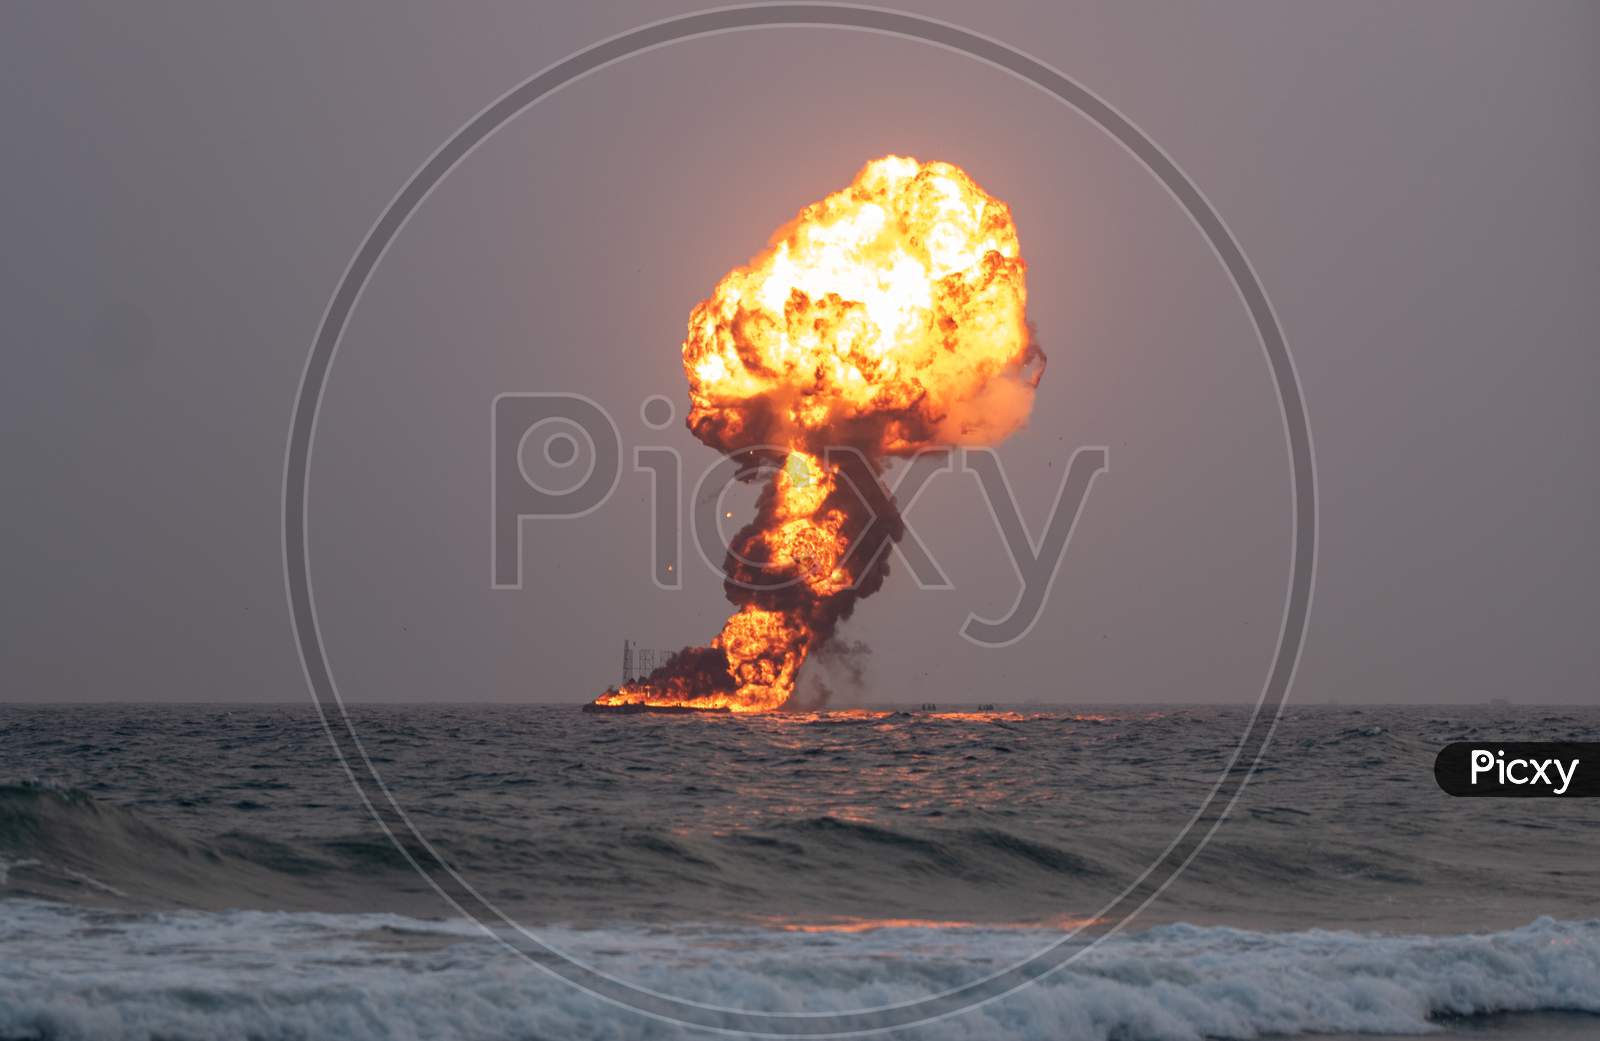 Explosion of a dummy target by Indian Navy on Navy Day,2019 in Visakhapatnam